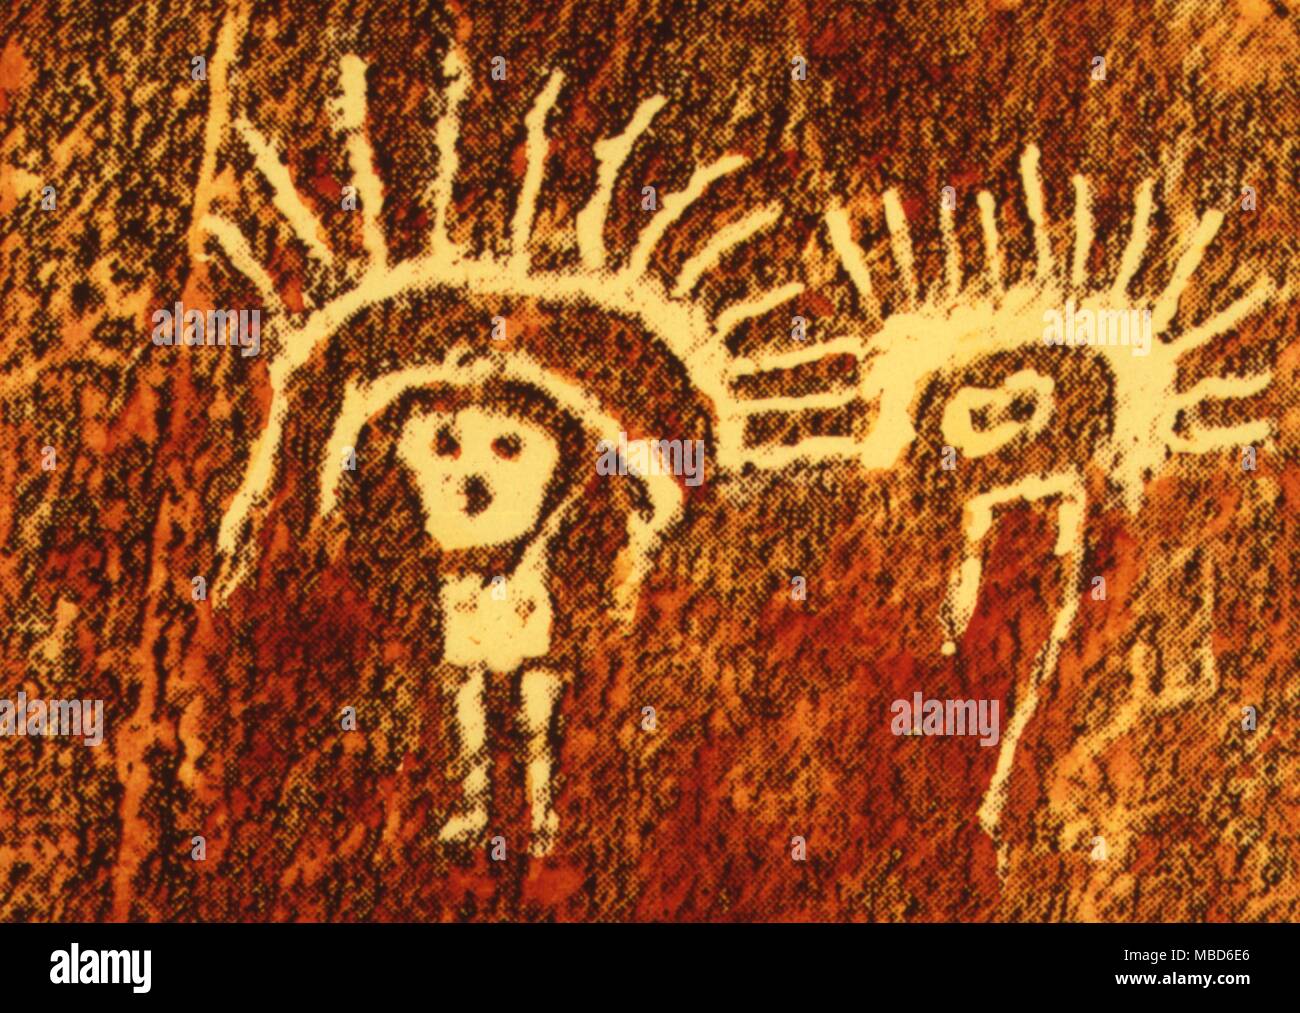 Drawings of the Nazca culture in the Peruvian desert. Images of men, claimed by Von Daniken to be ' Space Men ' . Stock Photo